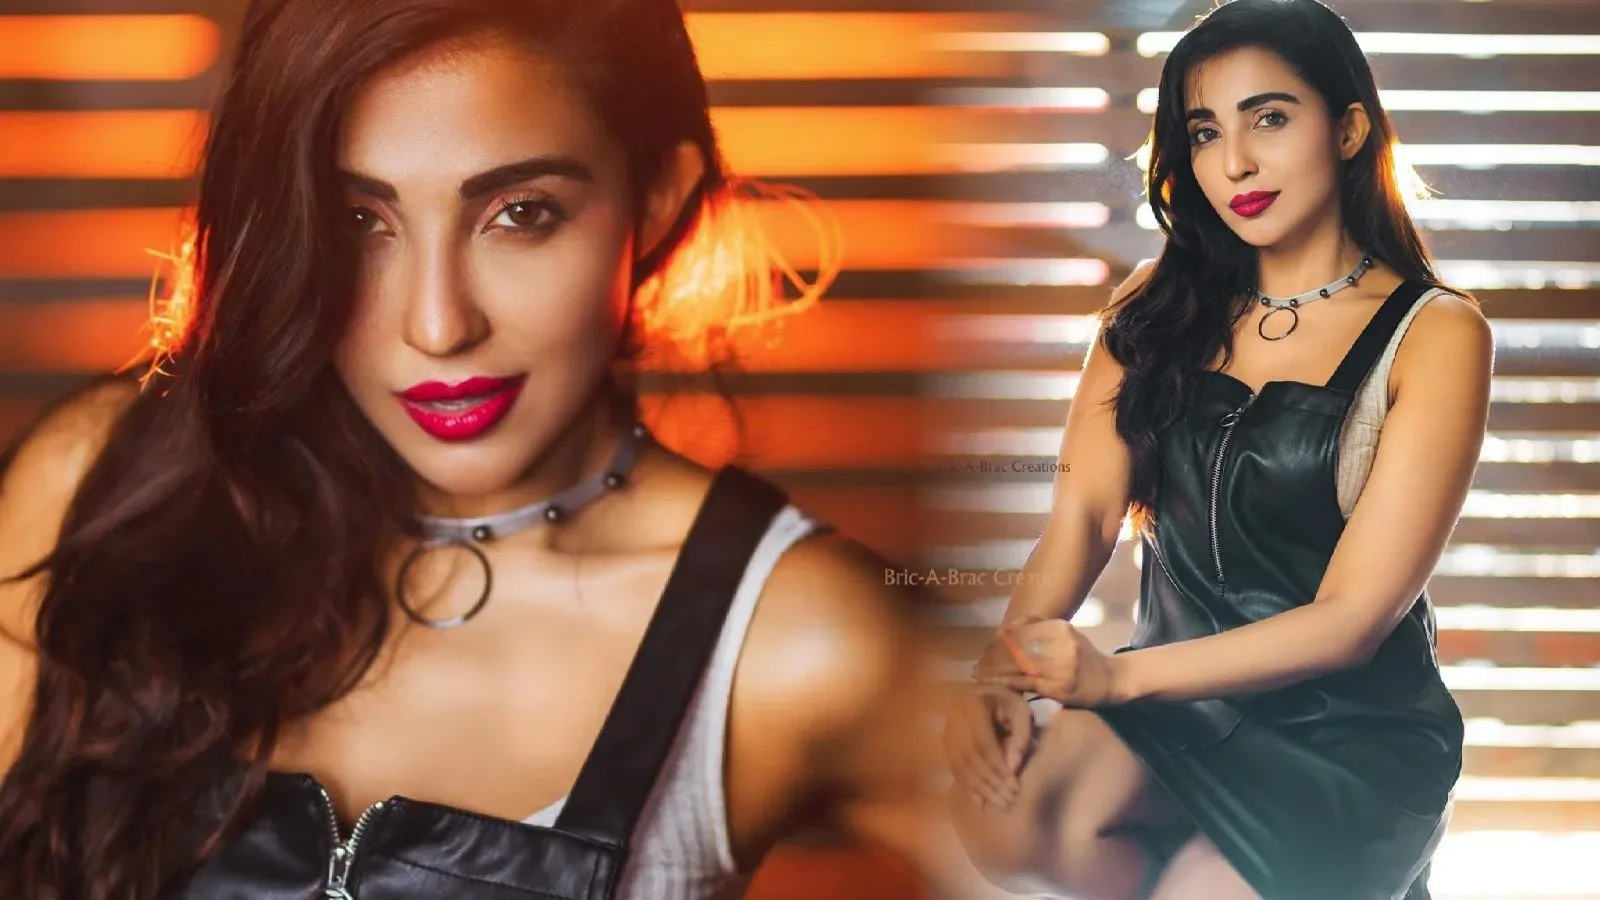 Actress Parvati Nair Looks stylish in a black outfit